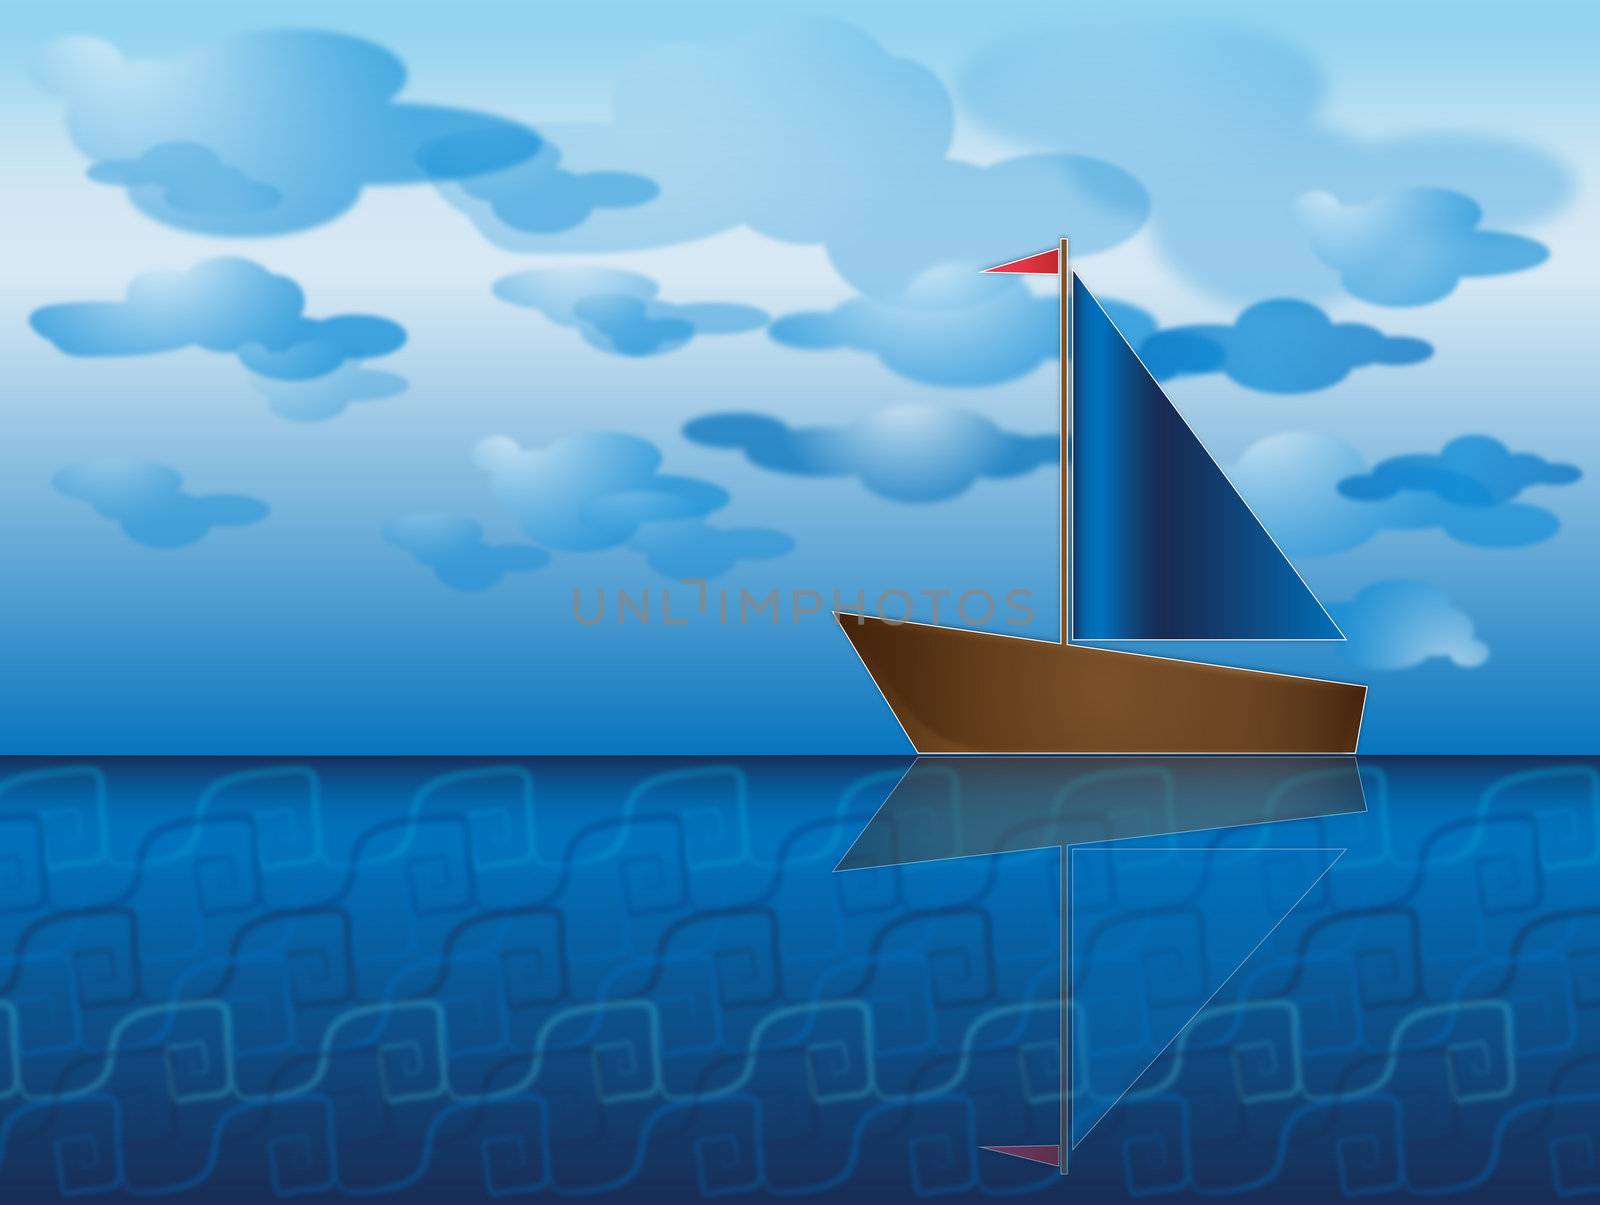 ship with a sail on water surface with pale blue clouds